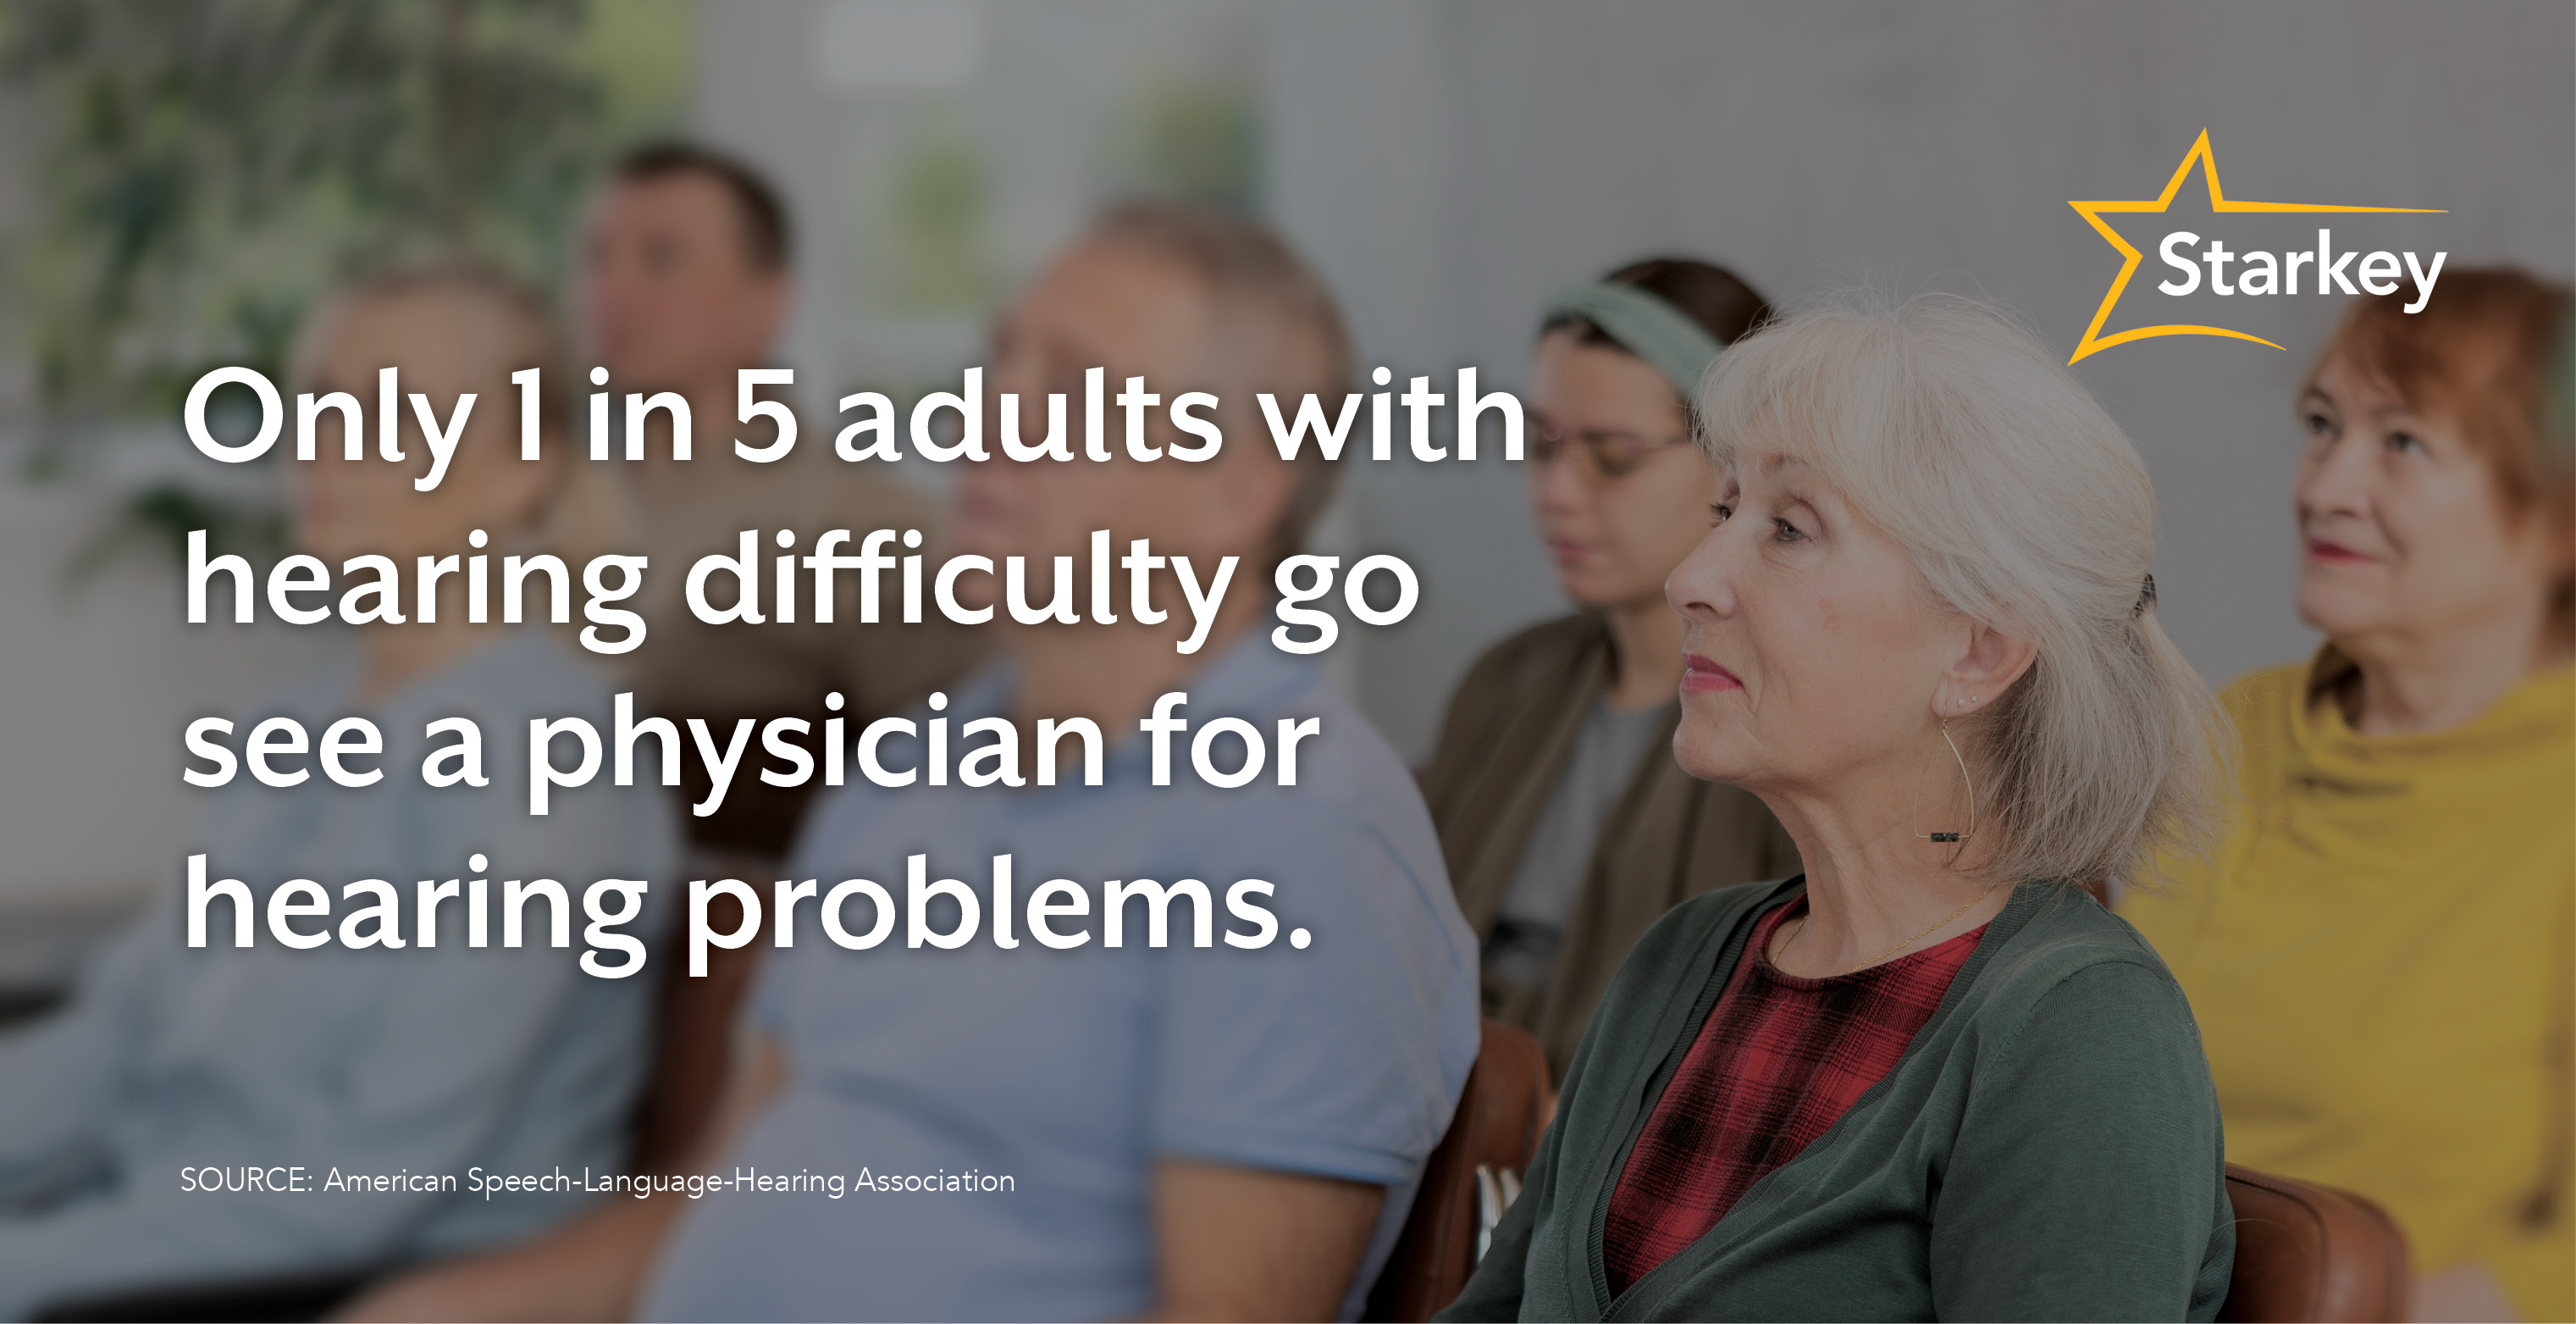 Image of group of seniors beside the quote "Only 1 in 5 adults with hearing difficulty go see a physician for hearing problems."